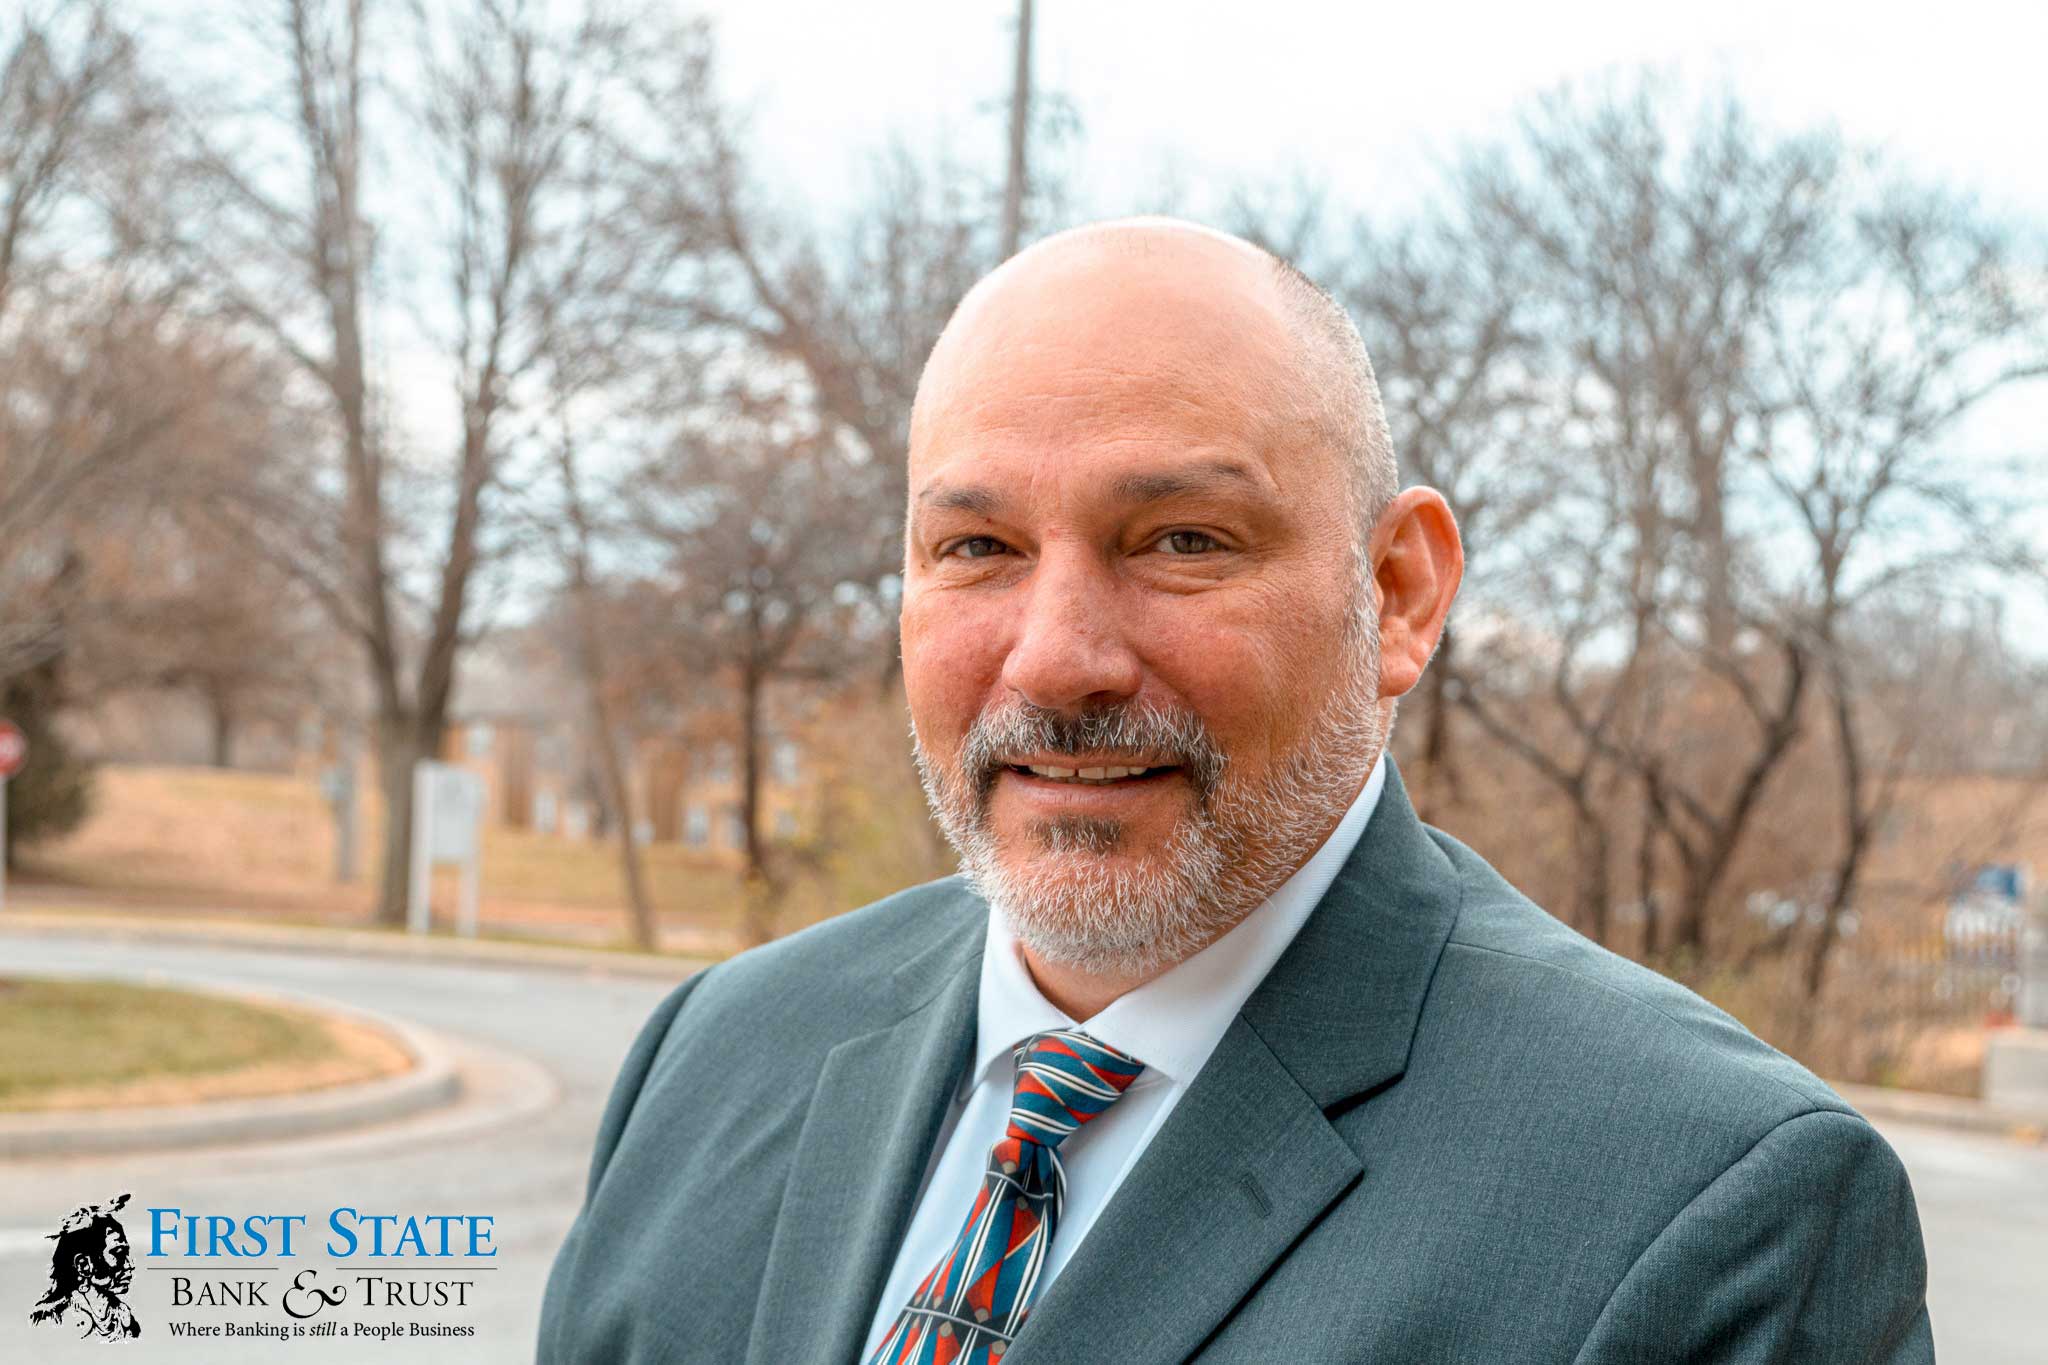 First State Bank & Trust – Marcus Lopez joins the team as Vice President/Commercial Loan Officer